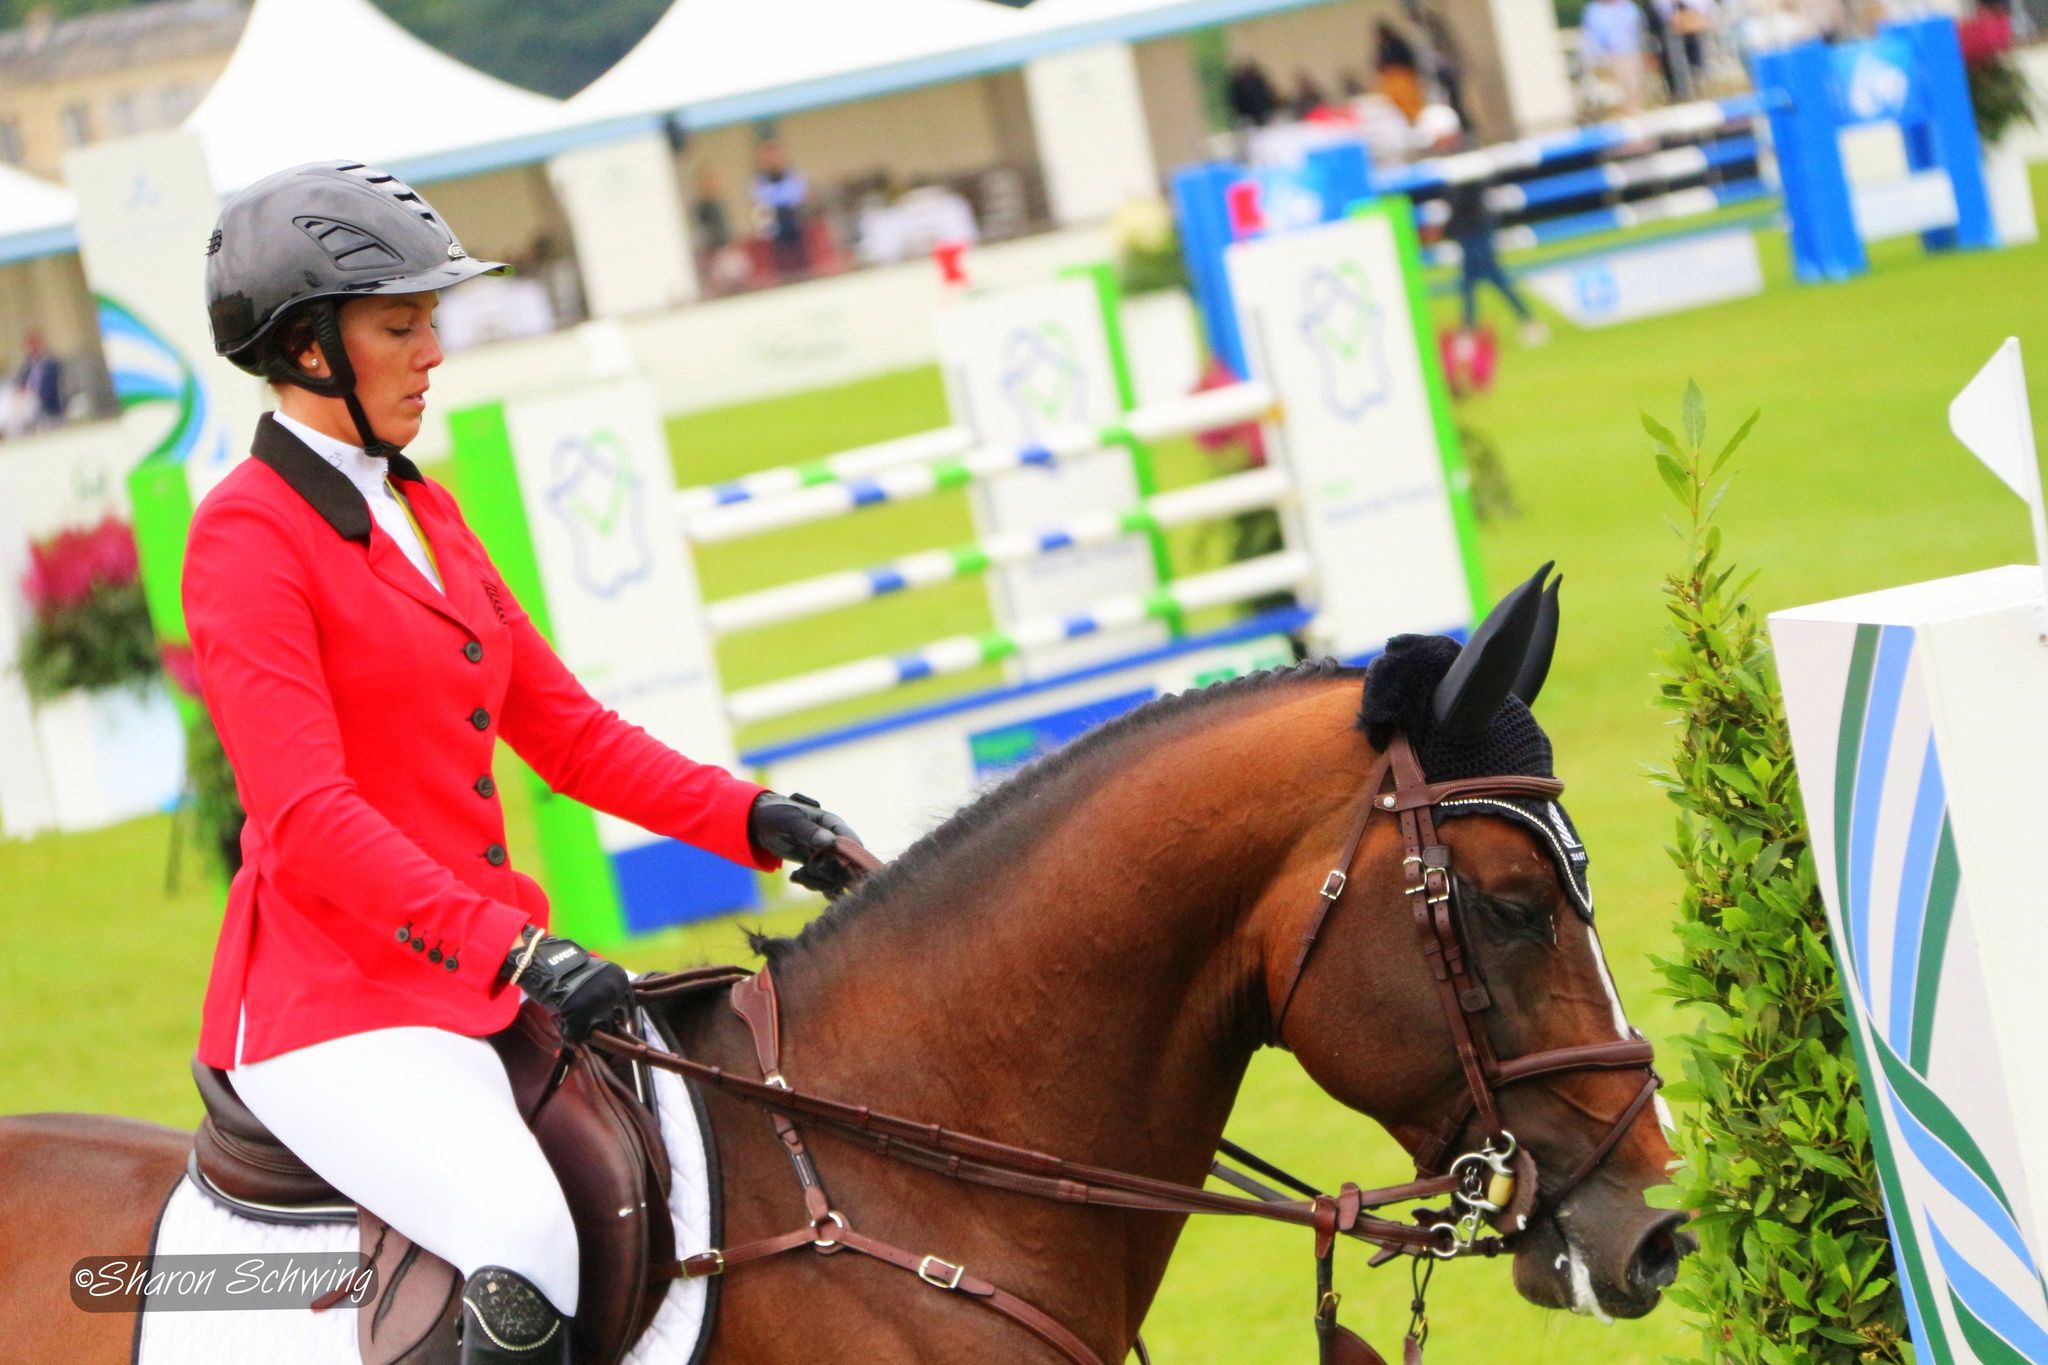 Luxury and top sport go hand in hand at Equestrian Cup in St Tropez!